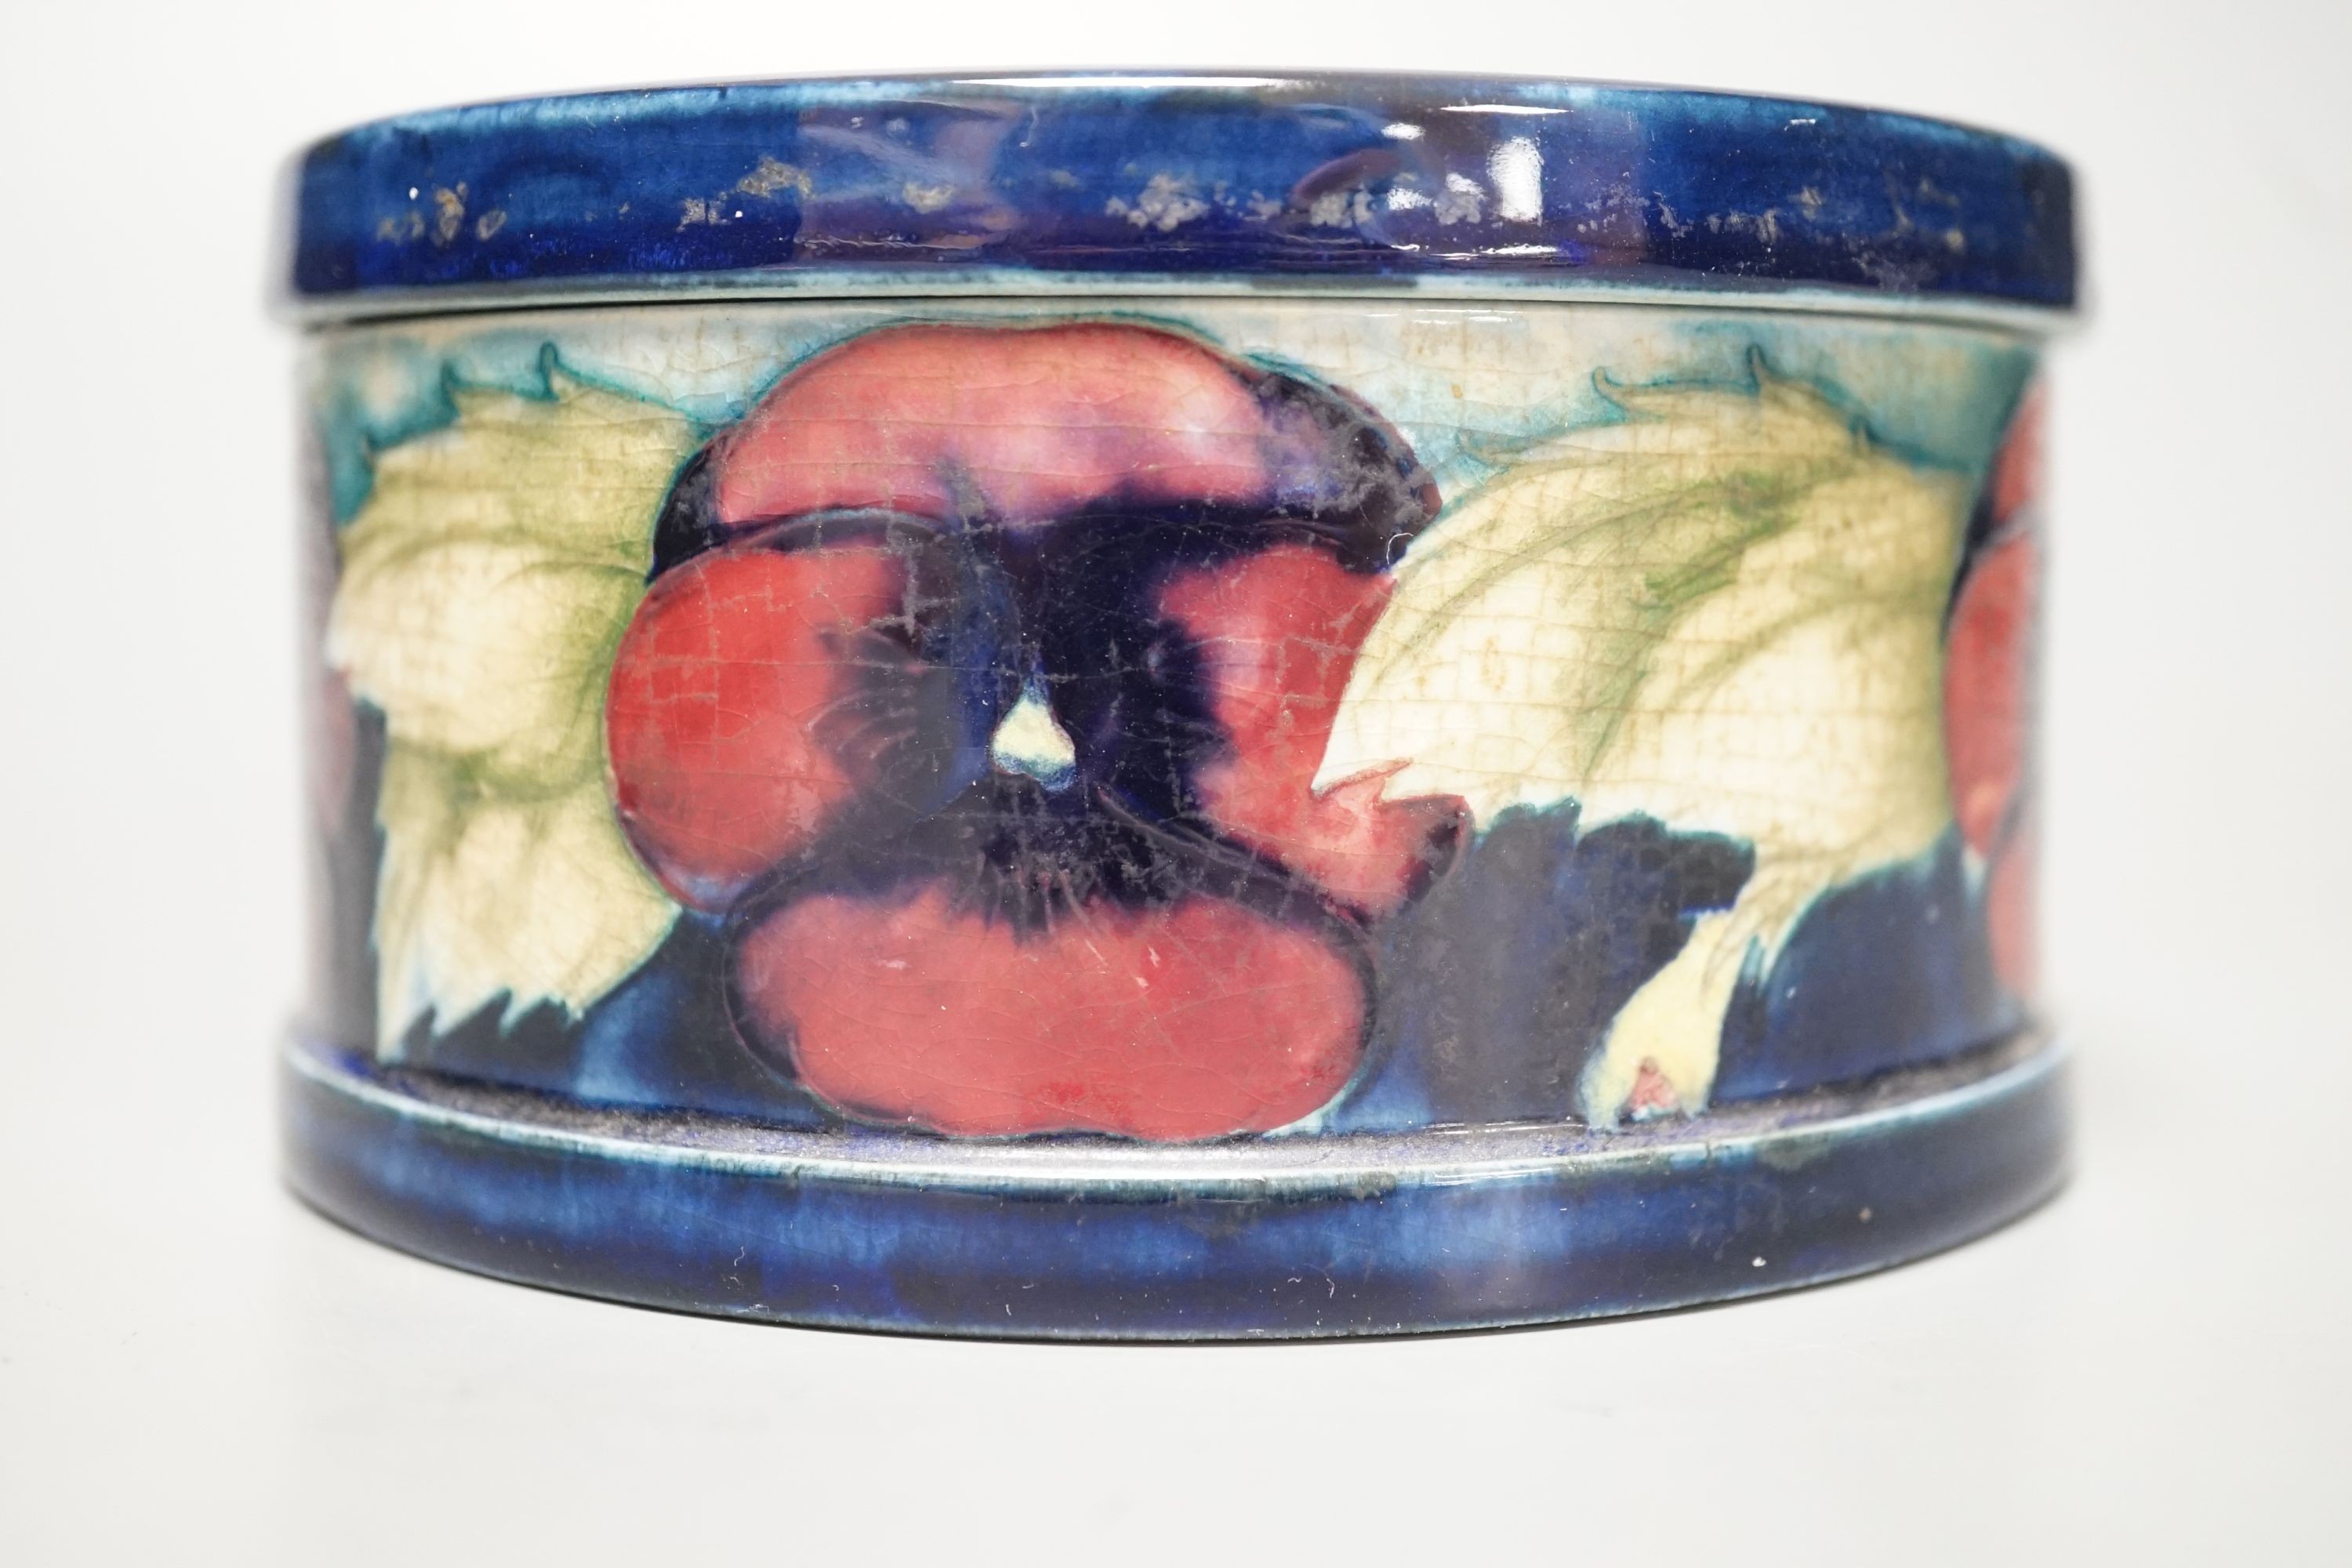 A Moorcroft pansy pattern circular box and cover, diameter 12cm